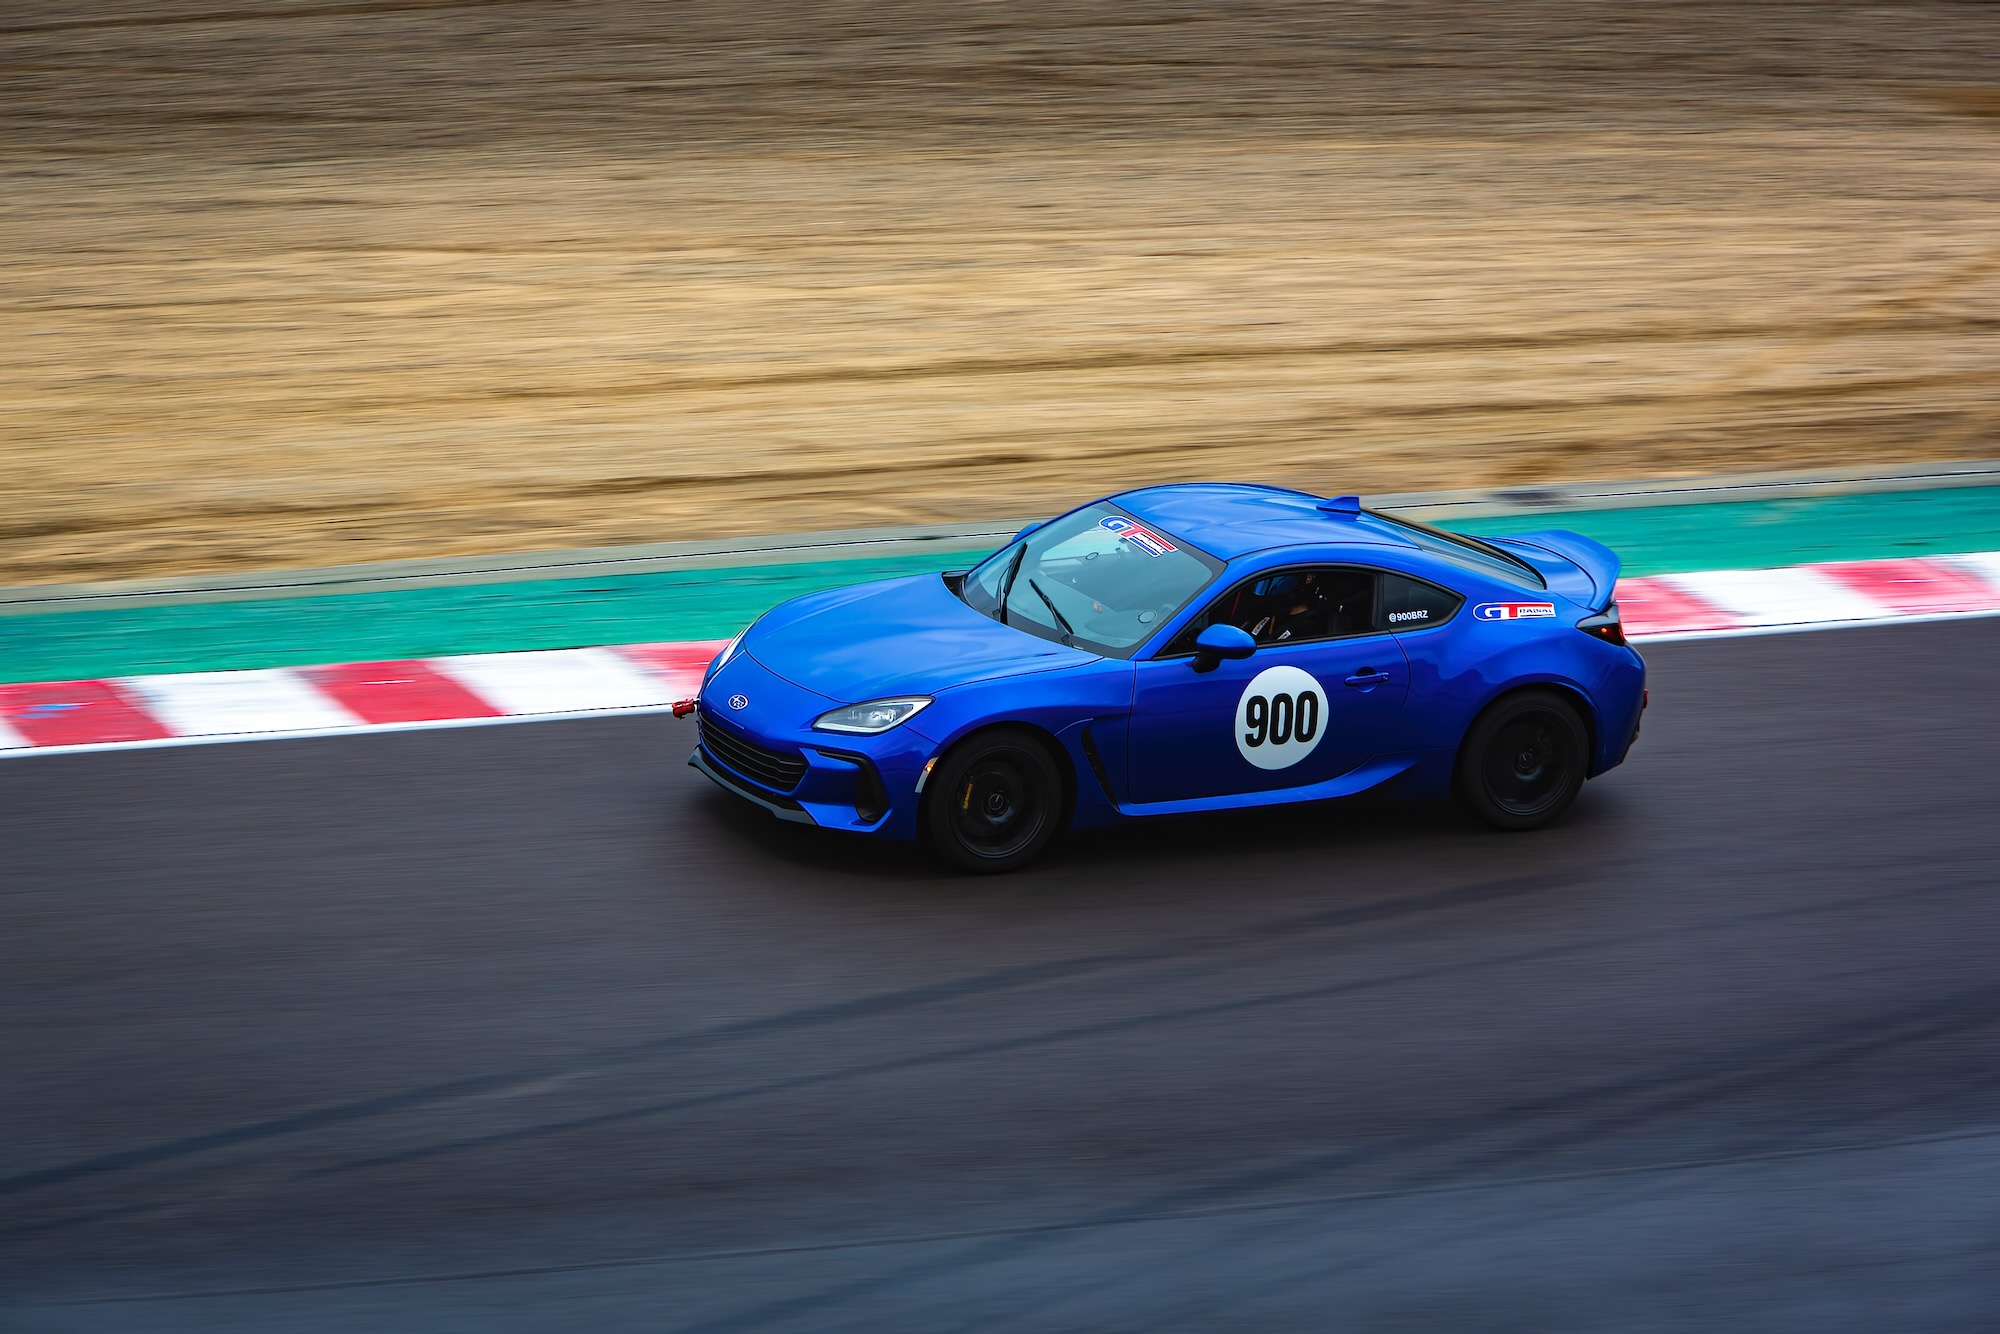 900BRZ on track at Laguna Seca in wet conditions